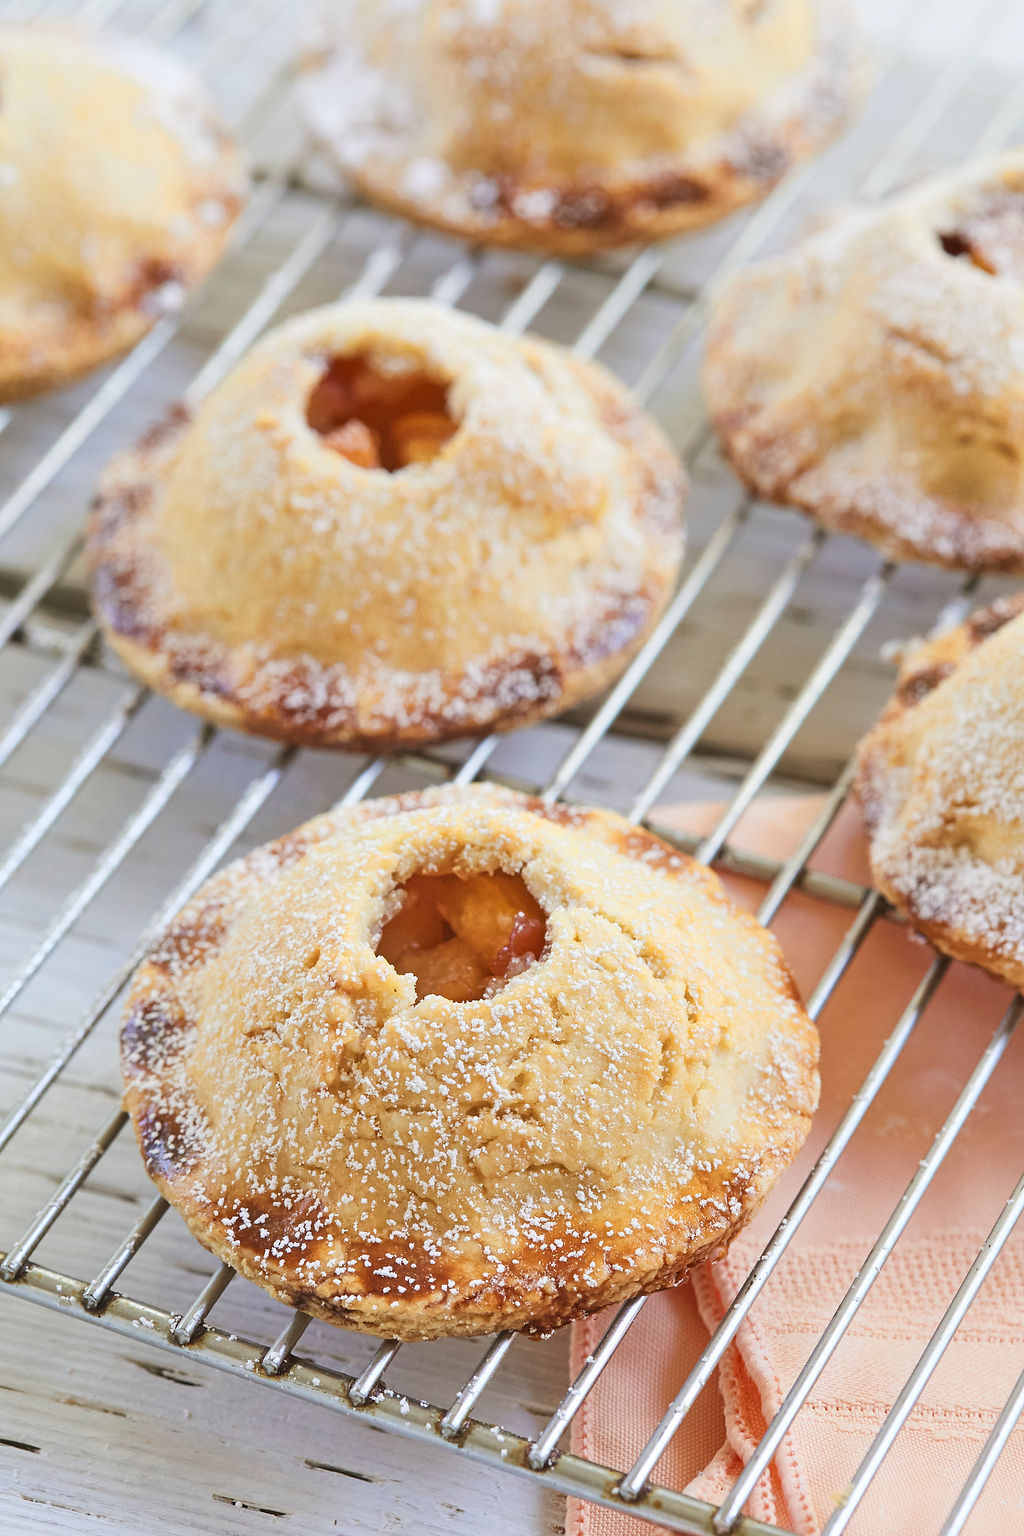 Peach Hand Pies dusted with powdered sugar.